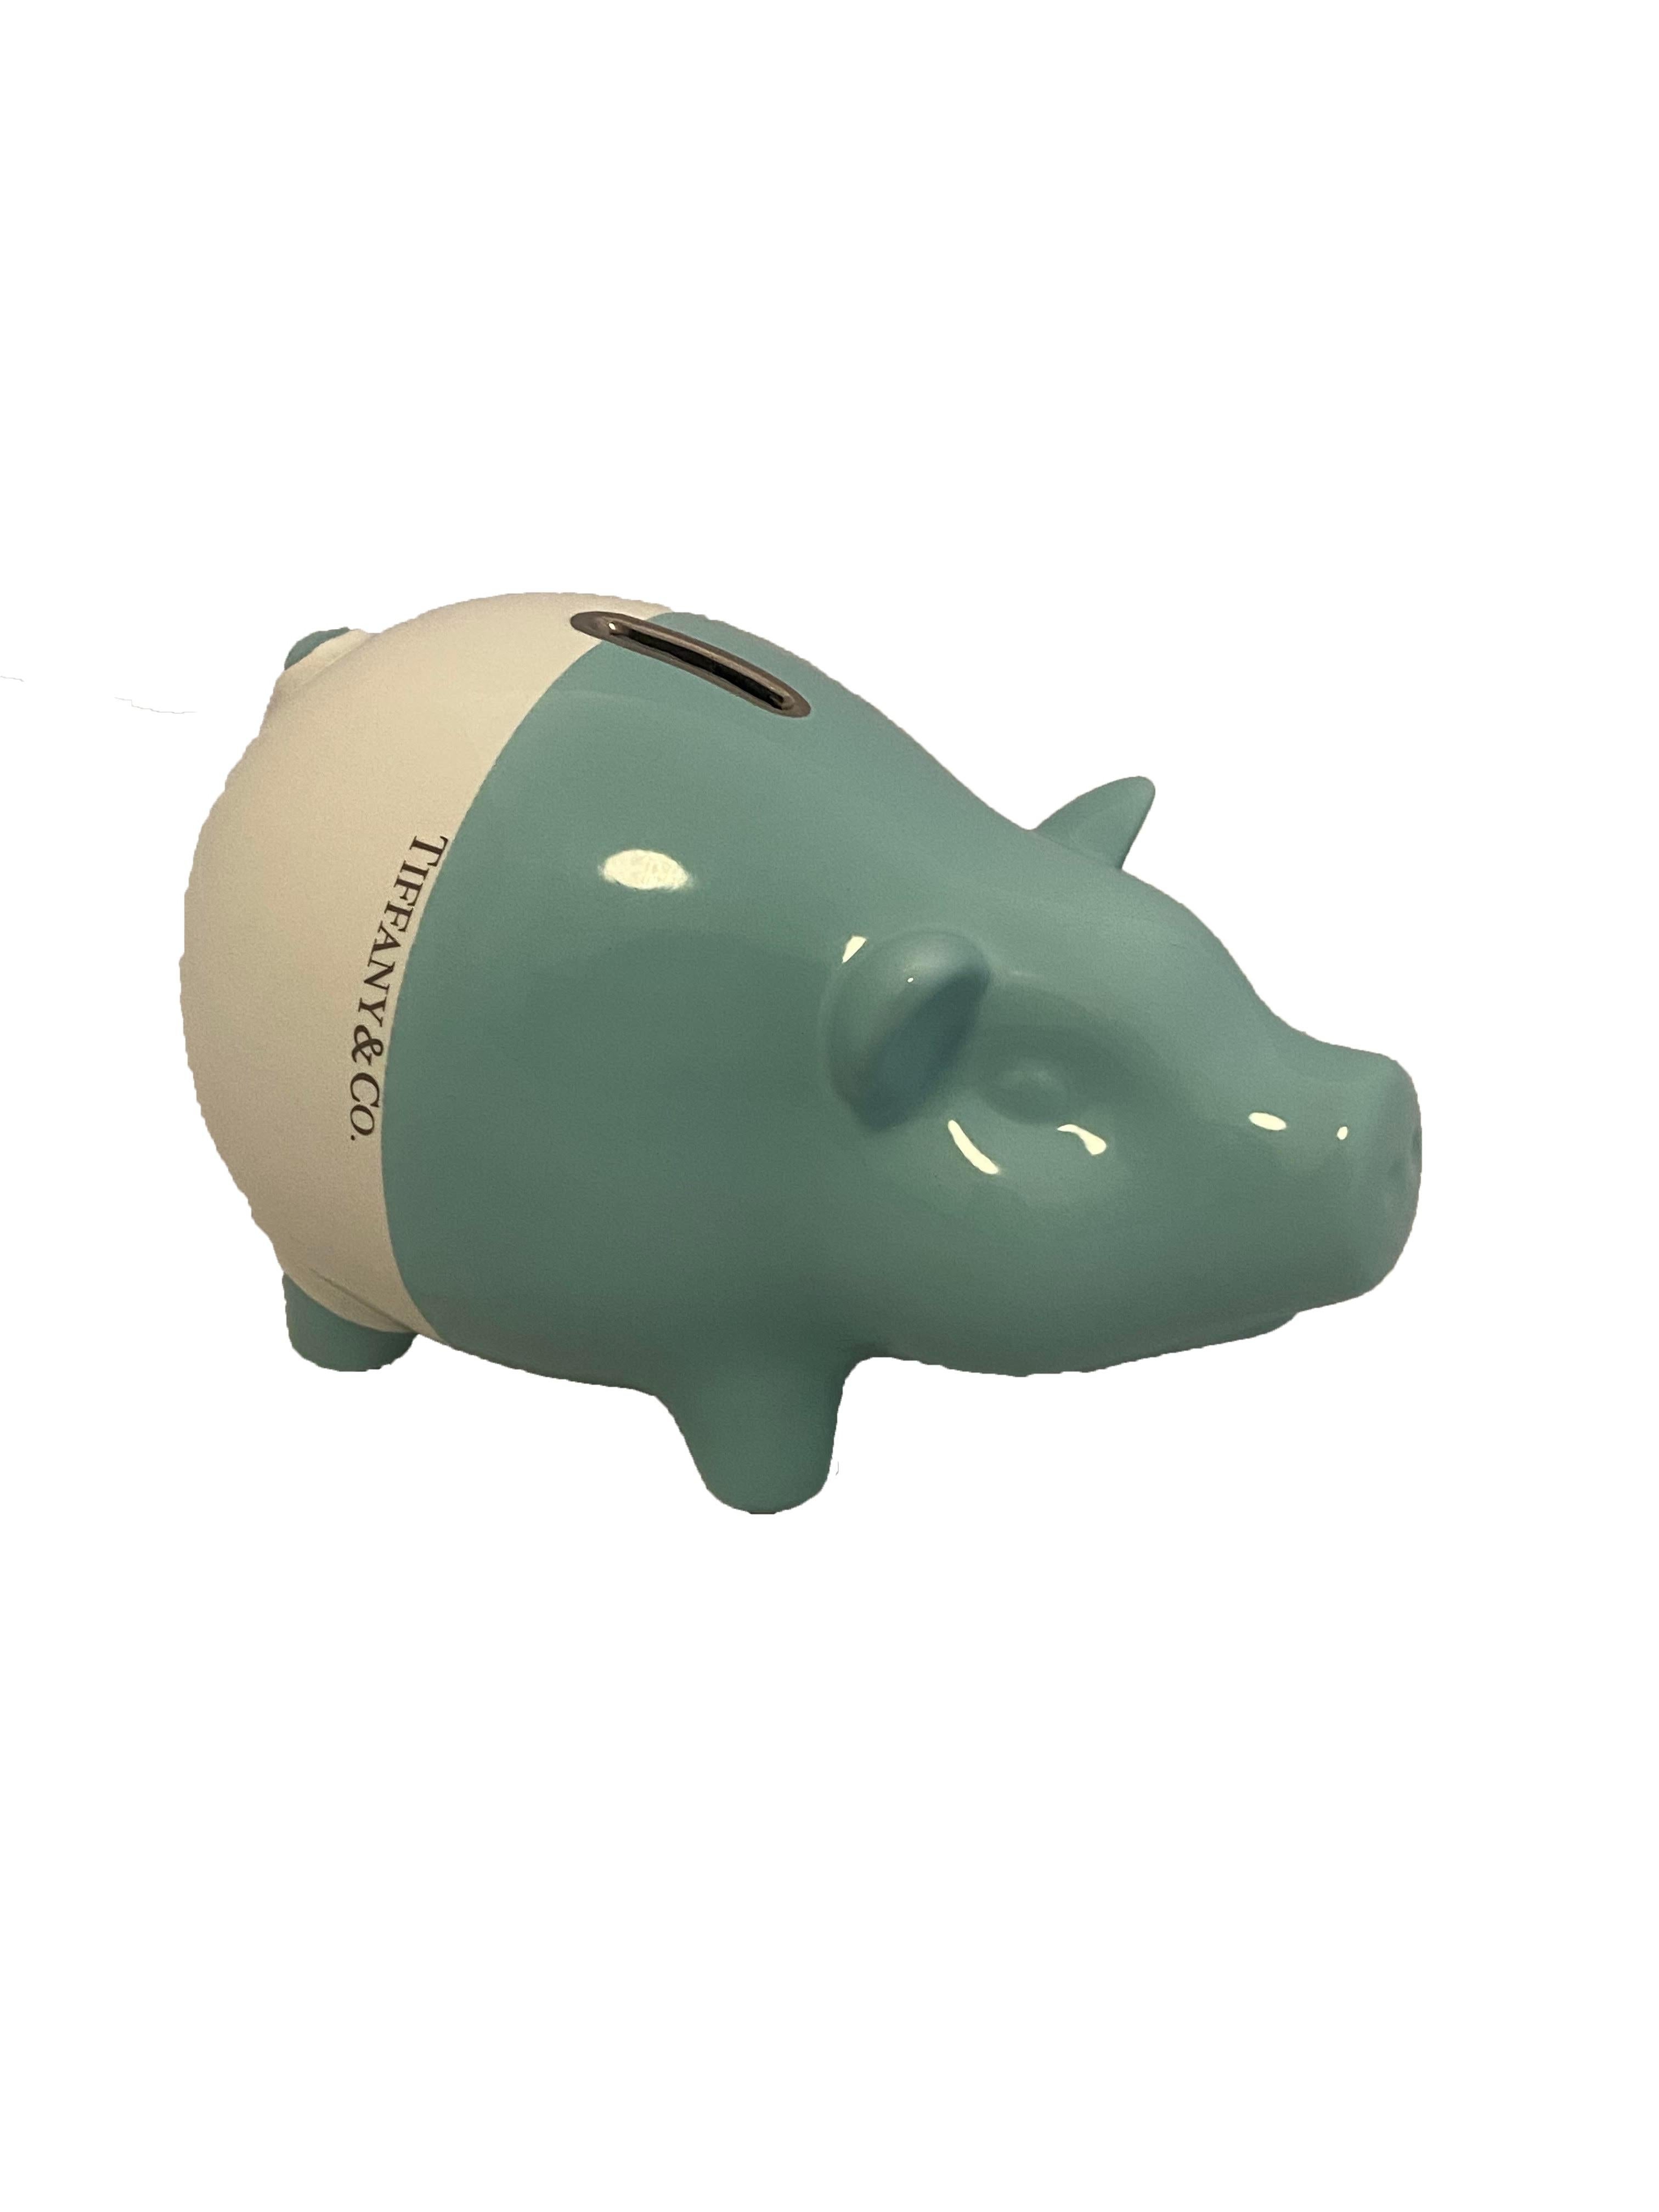 White and blue ceramic piggy bank from Tiffany & Co. Cute piglet shaped money bank crafted by Este Ceramiche in Italy and hand painted in the labels signature Tiffany blue and white with accent silver toned money slot at the top. Blue at the front